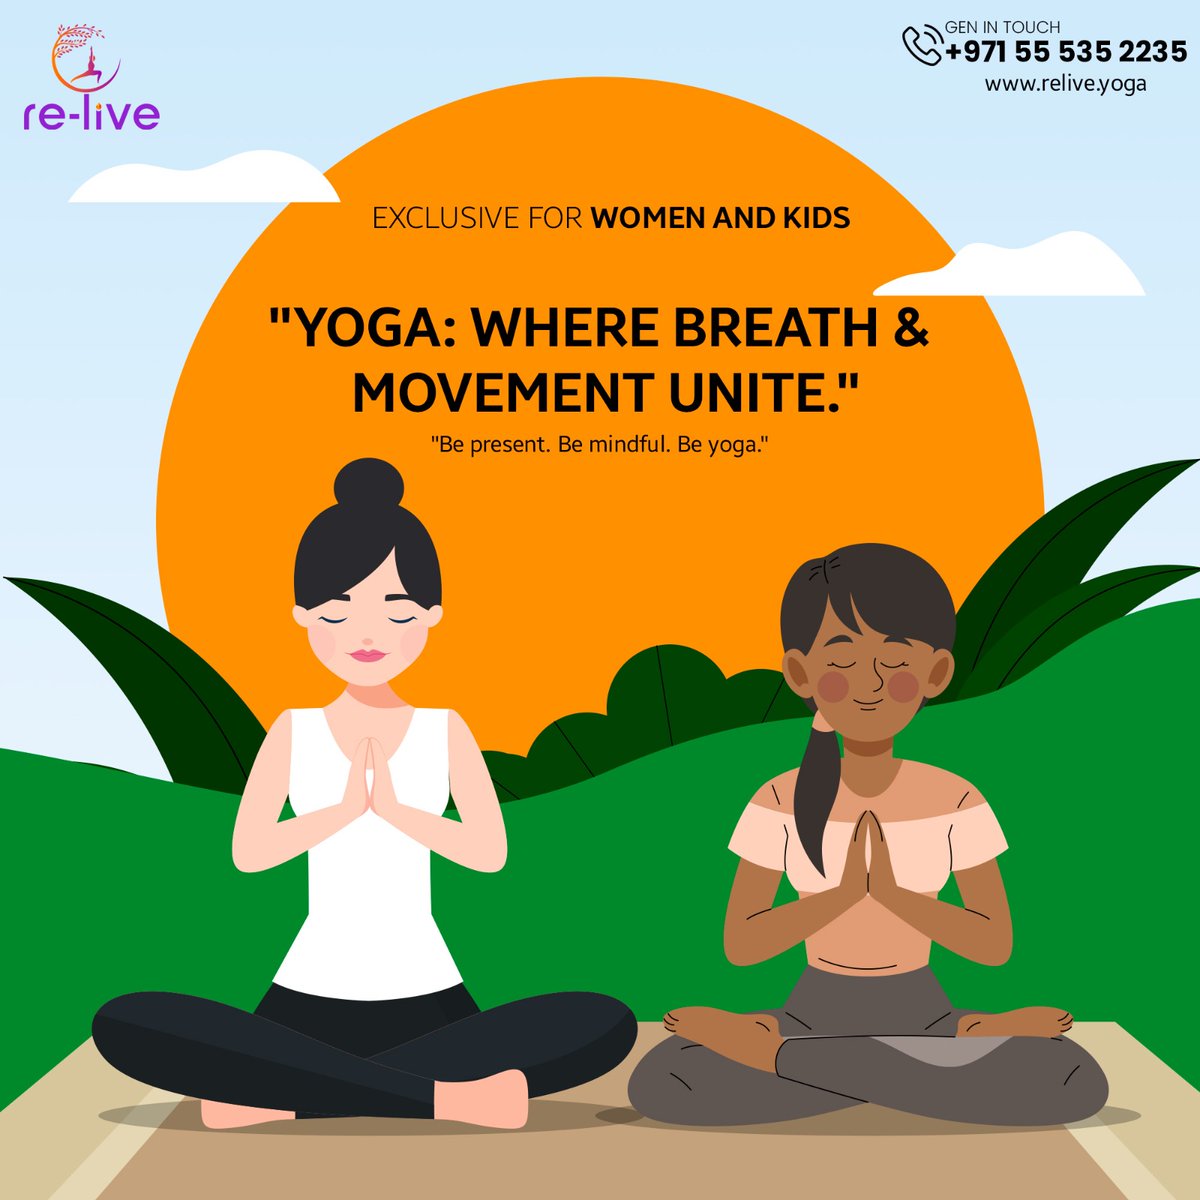 Yoga: Where Breath & Movement Unite.

Be Present. Be Mindful. Be Yoga.

Contact Us for More Details- +971 55 535 2235 / +971 50 956 1612

#yogaclasses #yogatrainer #yogateacher #yogateachers #yogapractice #yogatheoty #yogapeace #yogatrainers #yogastudio #yogaclass #yoga